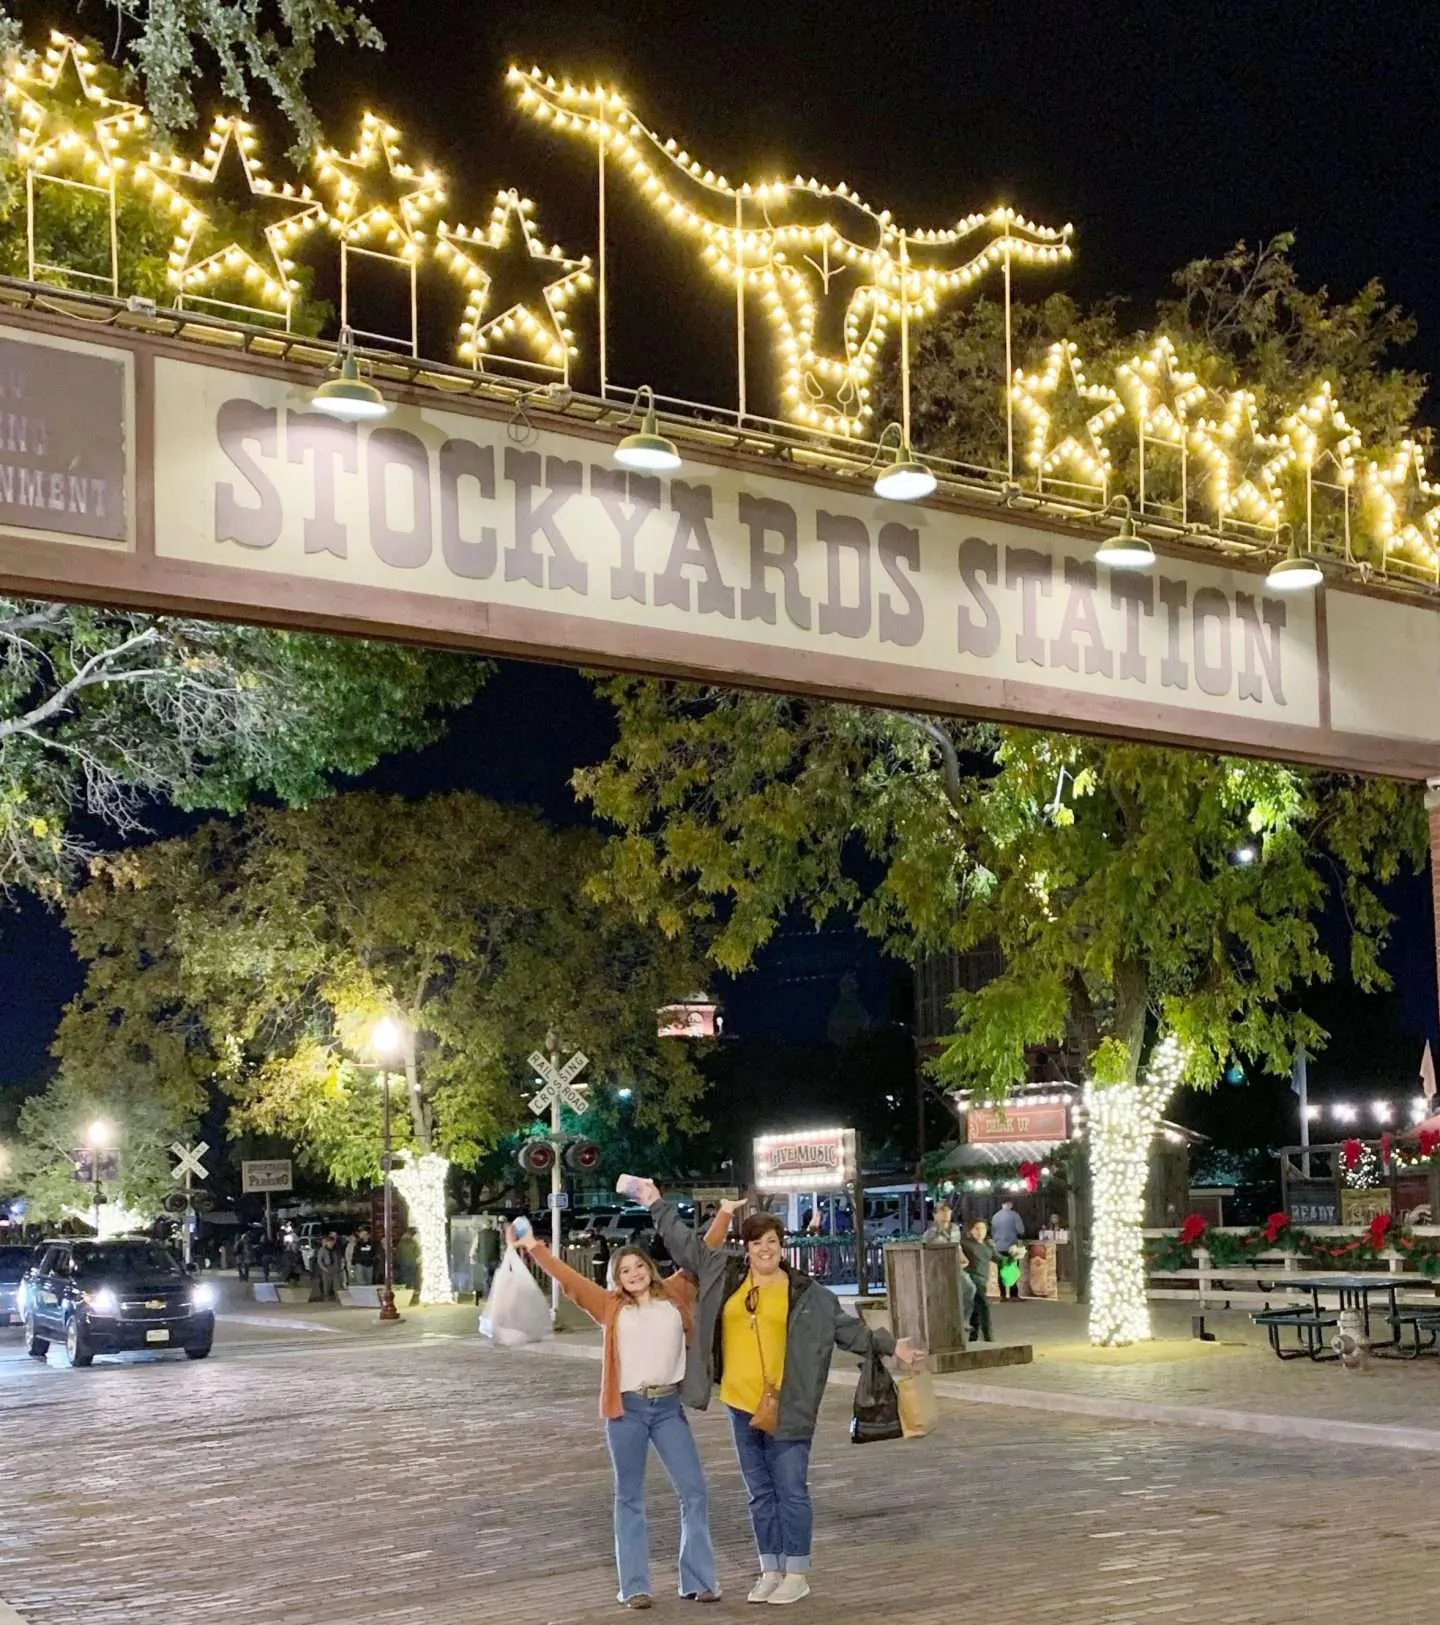 You can't visit Dallas-Fort Worth without a visit to the Stockyards.